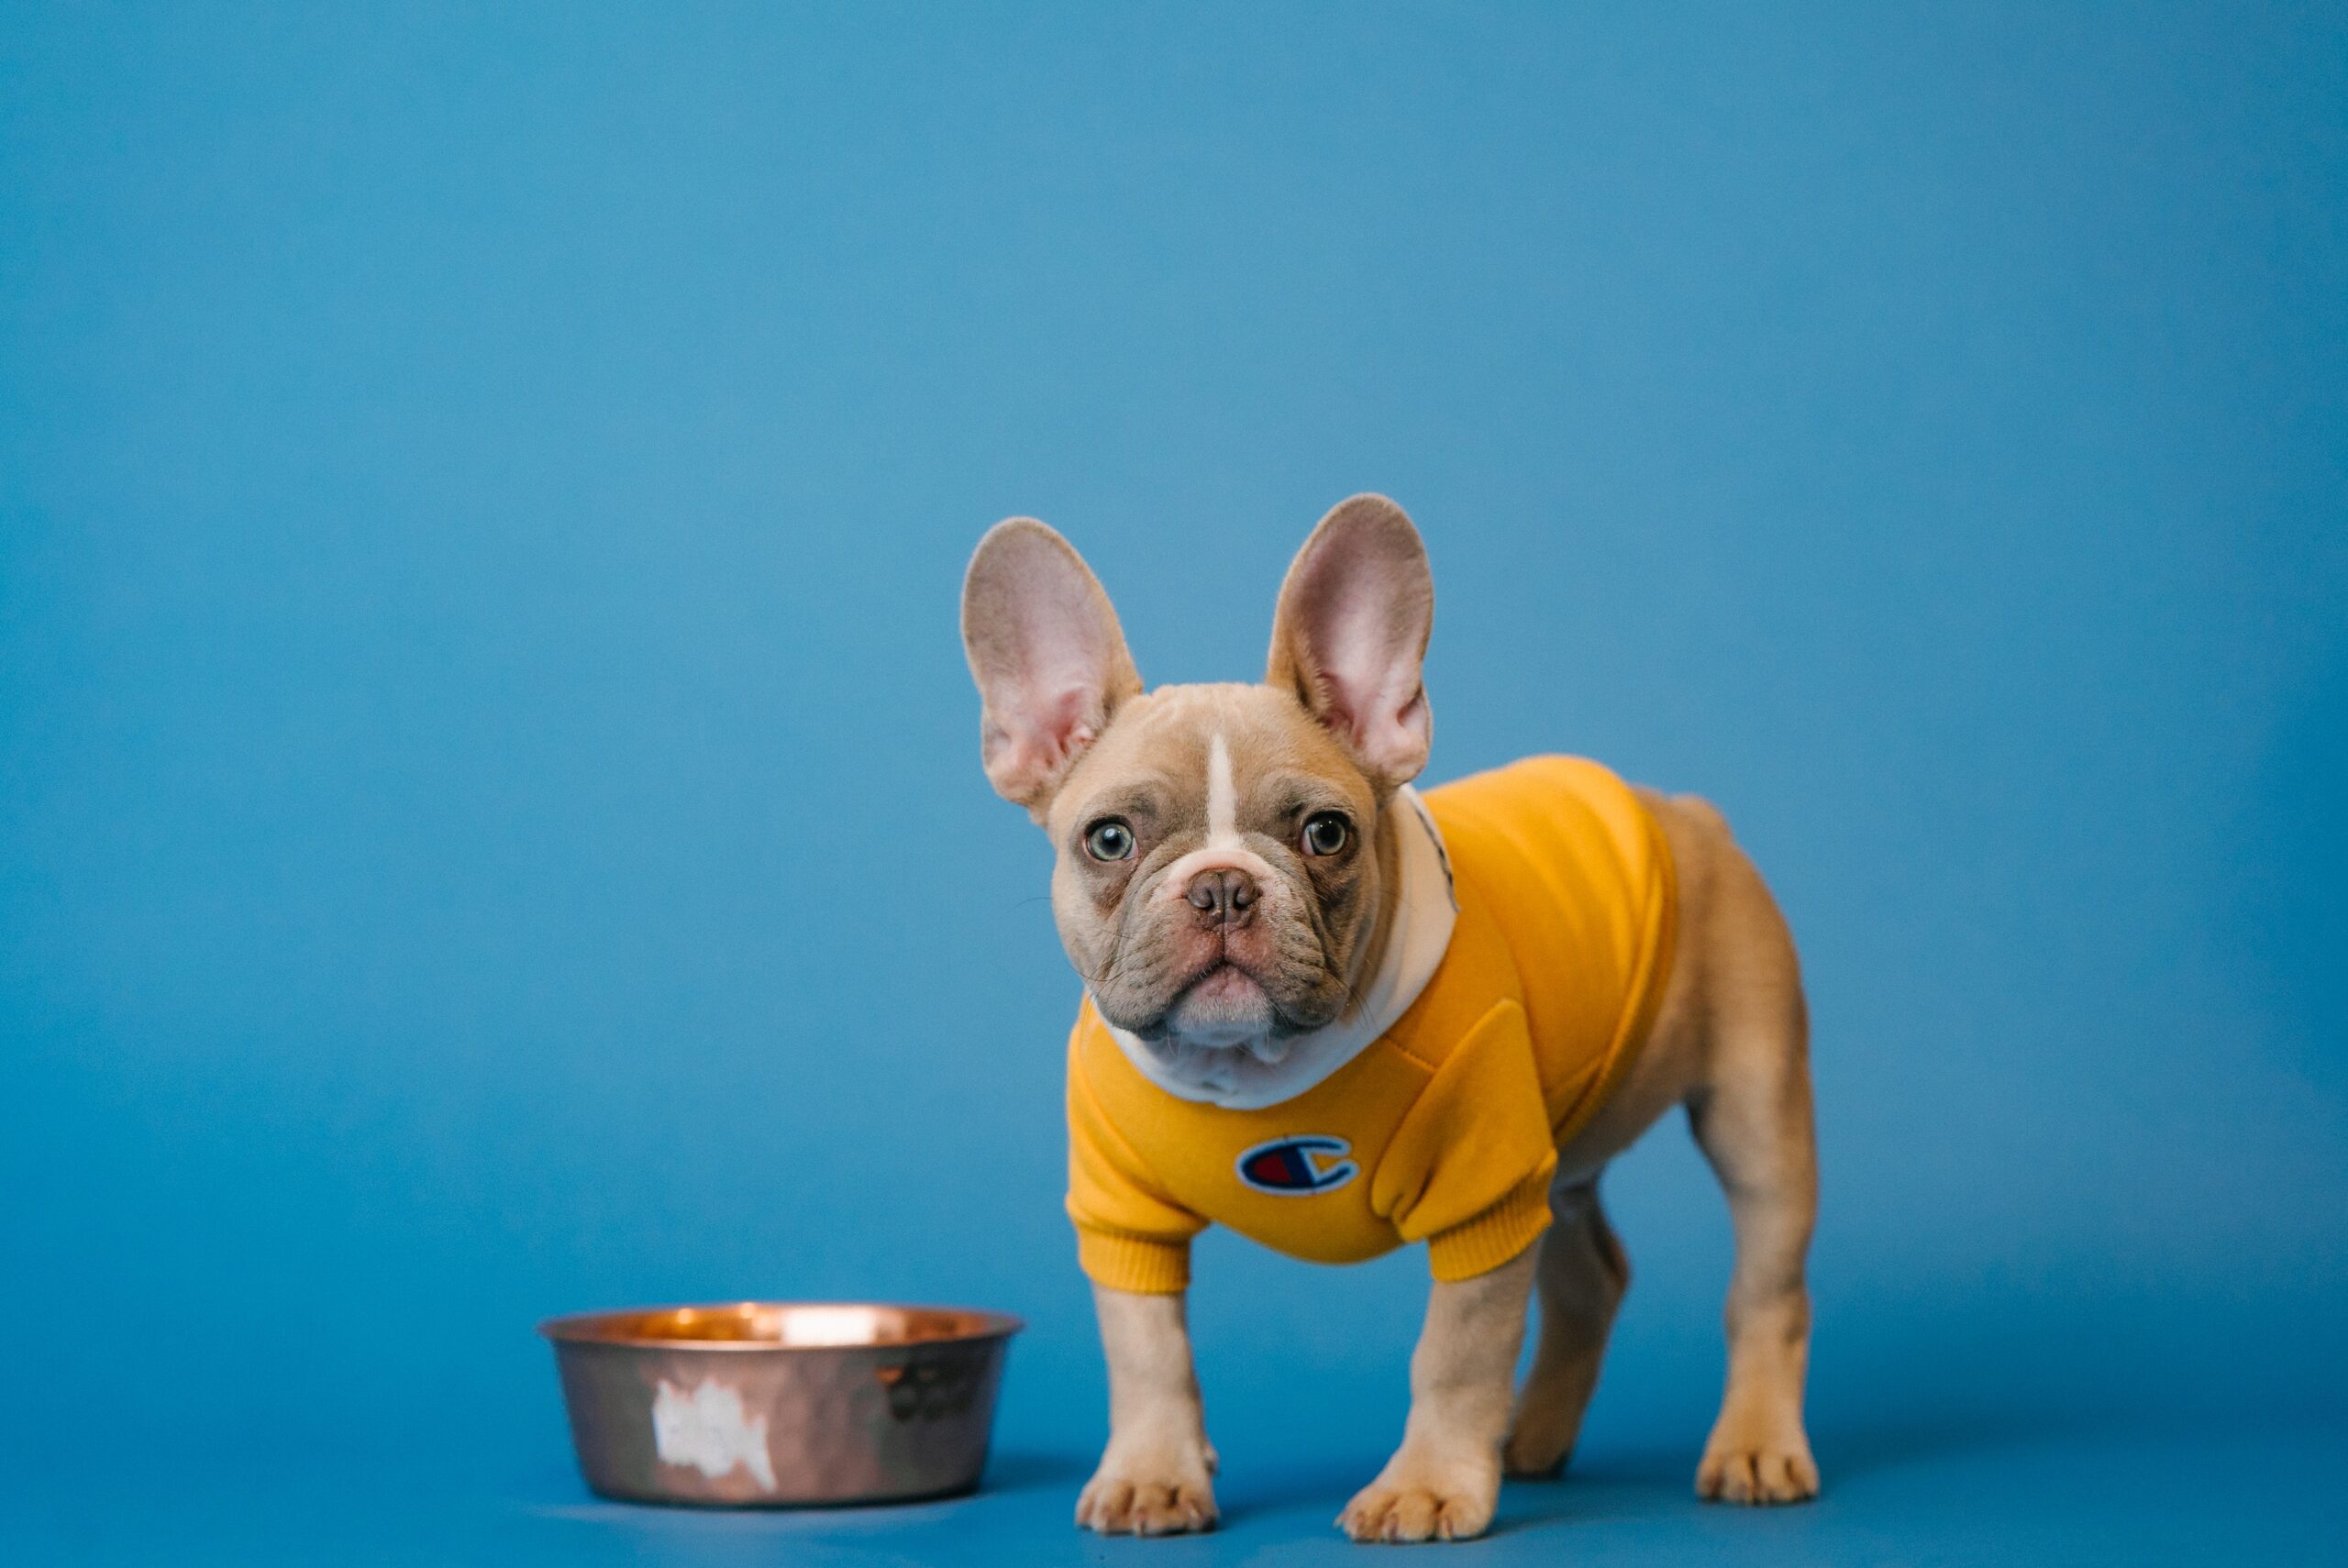 Small brown dog in yellow sweater stands next to food bowl.